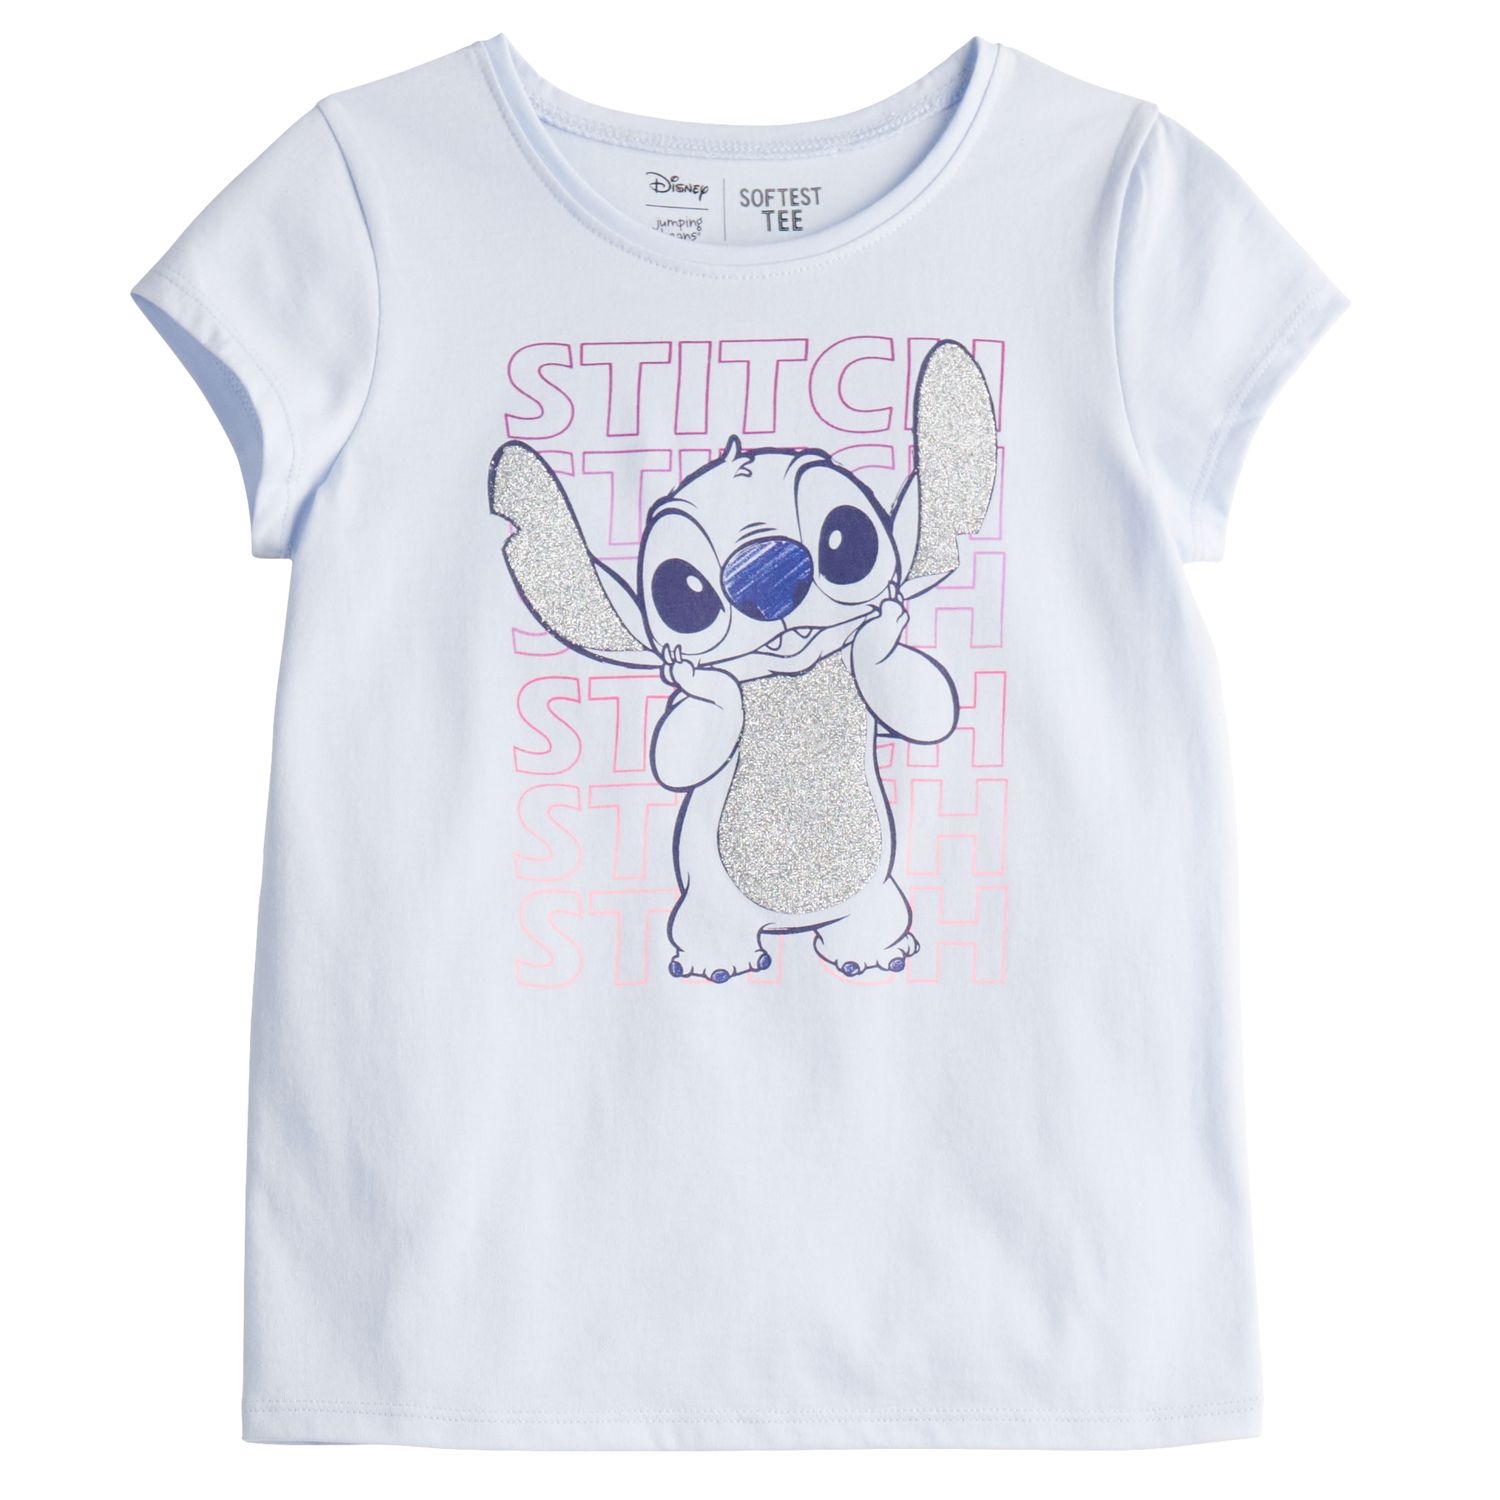 Image for Disney/Jumping Beans Disney Girls 4-12 Graphic Tee by Jumping Beans® at Kohl's.